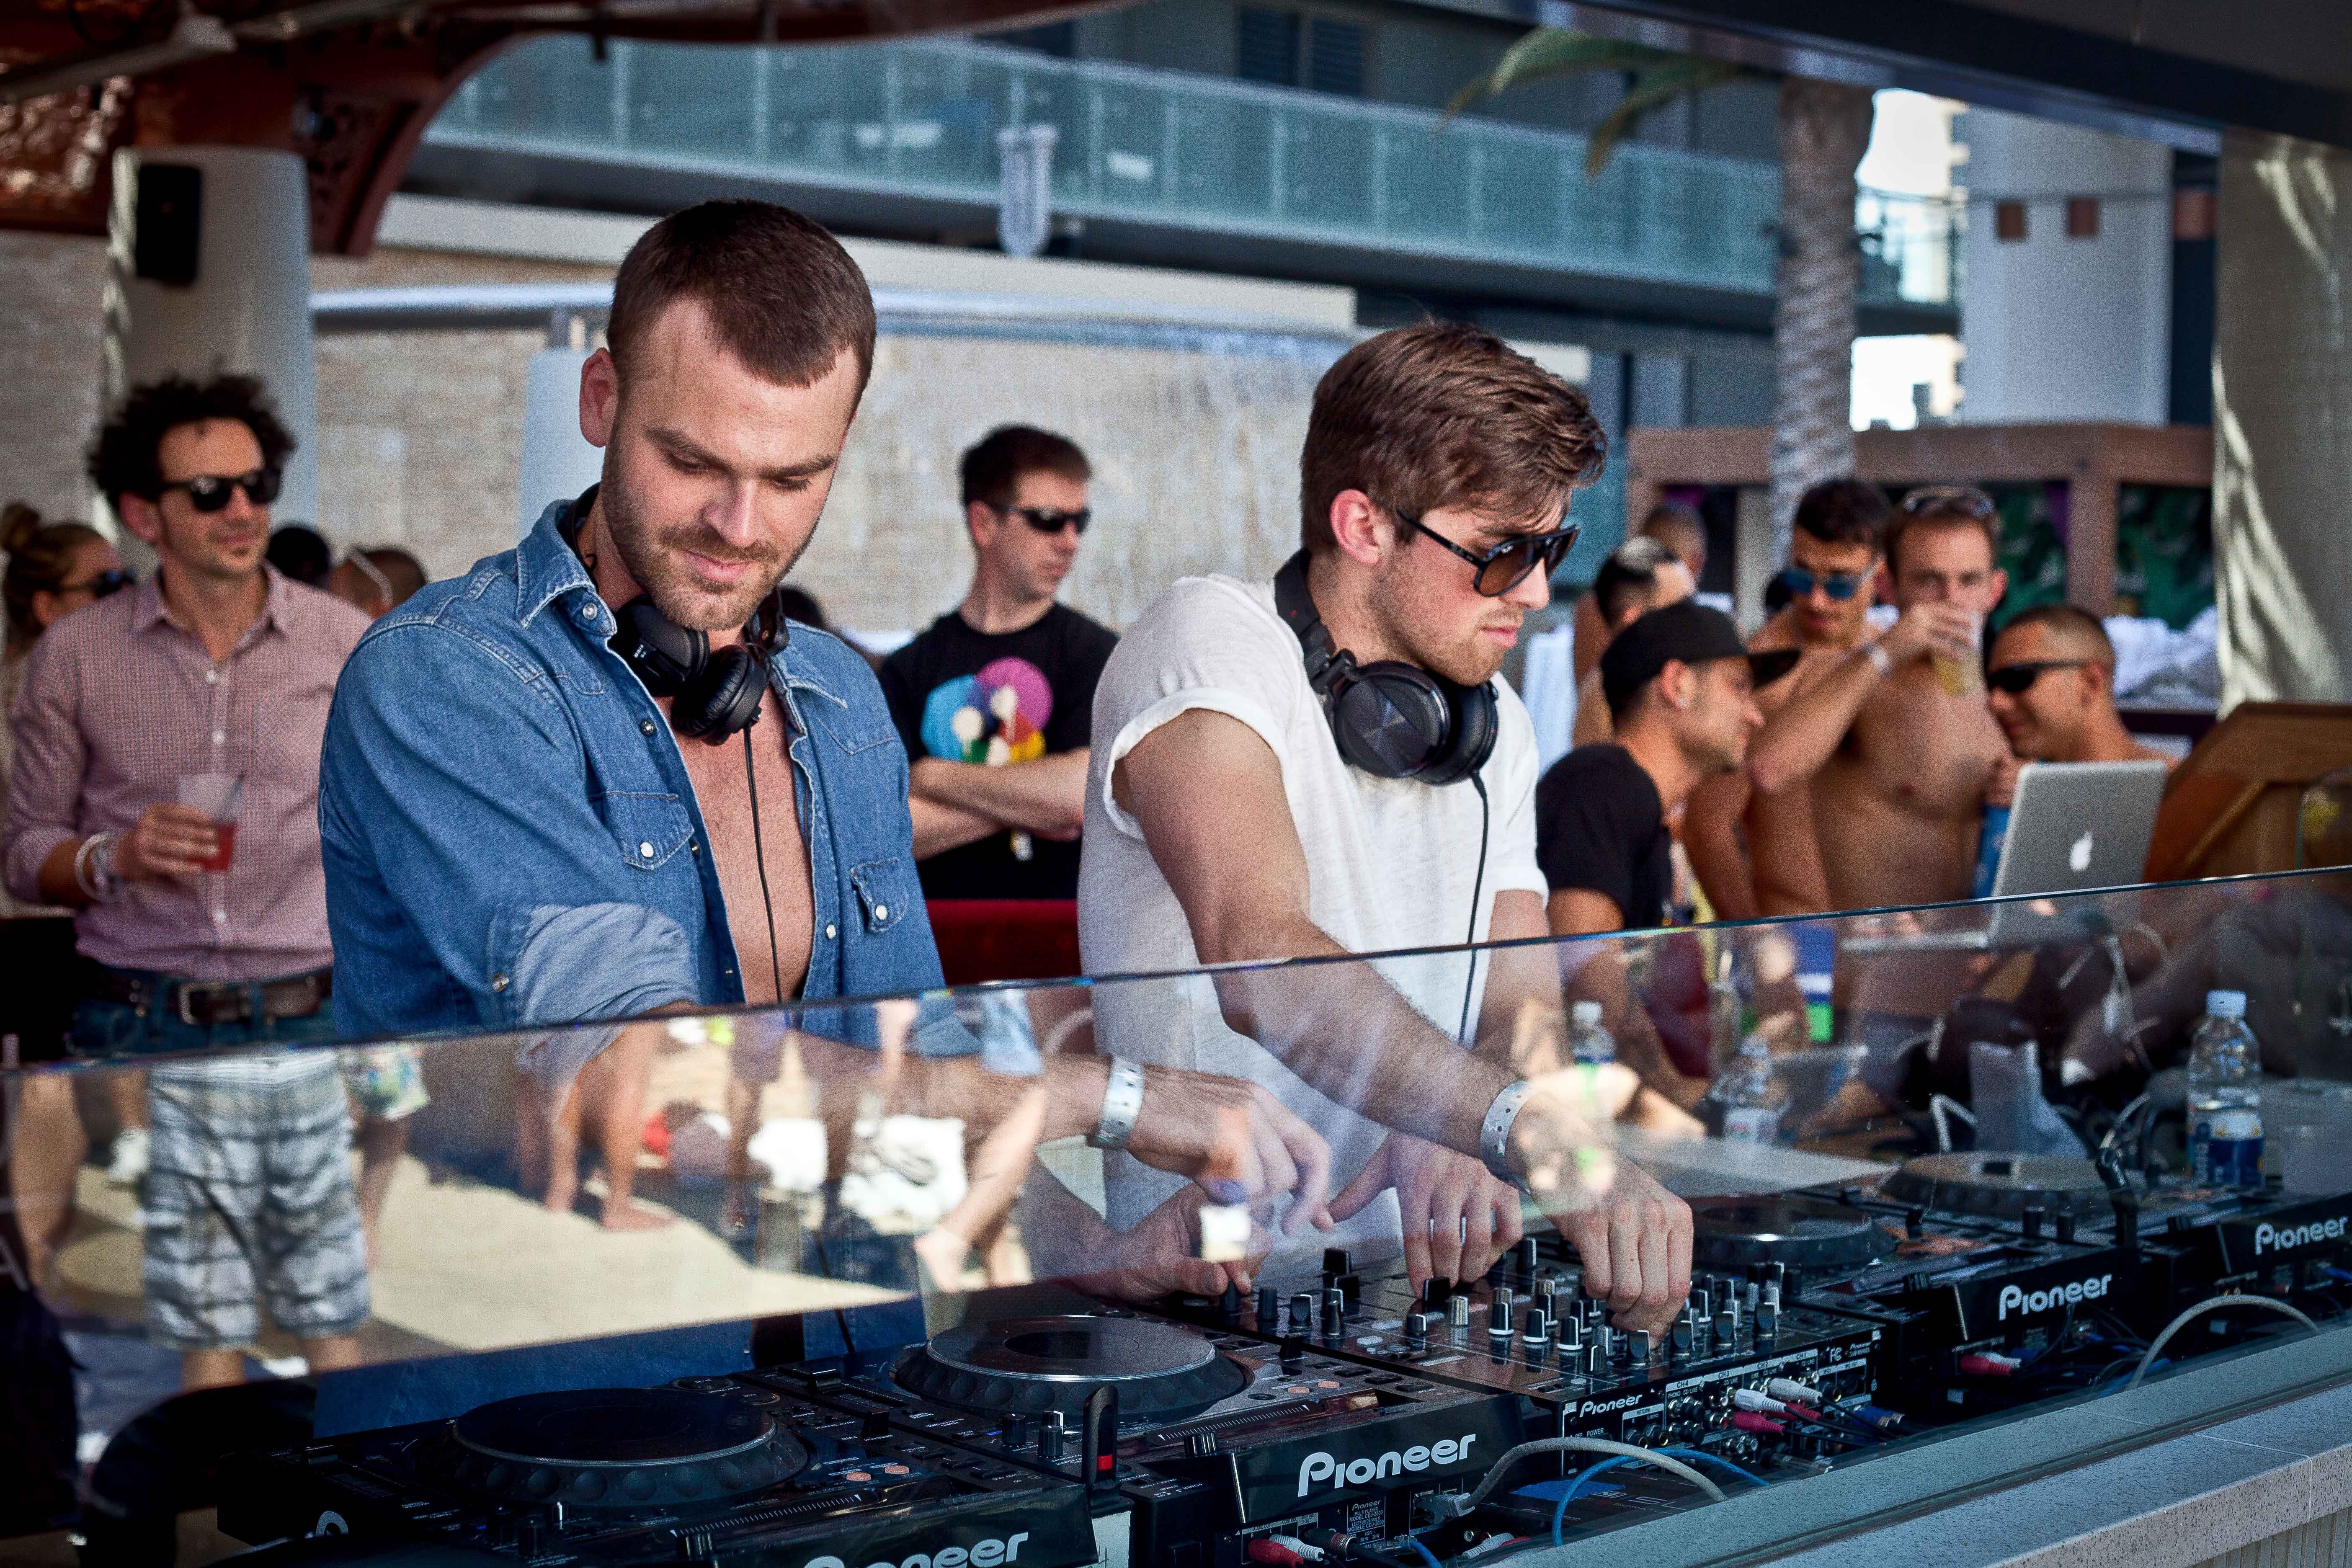 The Chainsmokers Wallpaper Hd Backgrounds Images - Chainsmokers 2013 , HD Wallpaper & Backgrounds